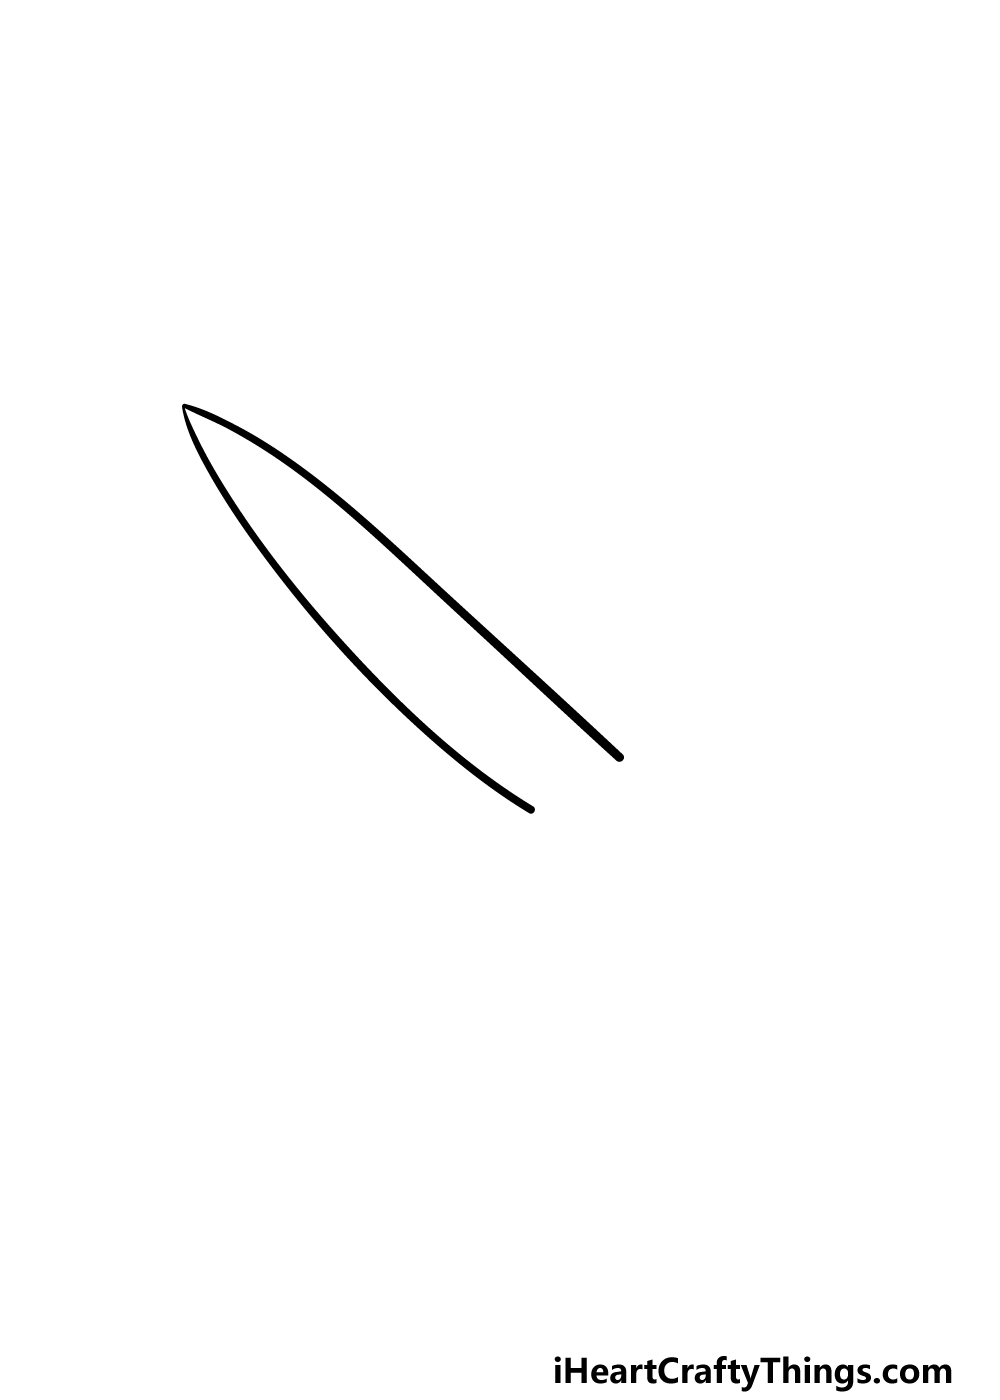 drawing a knife step 1